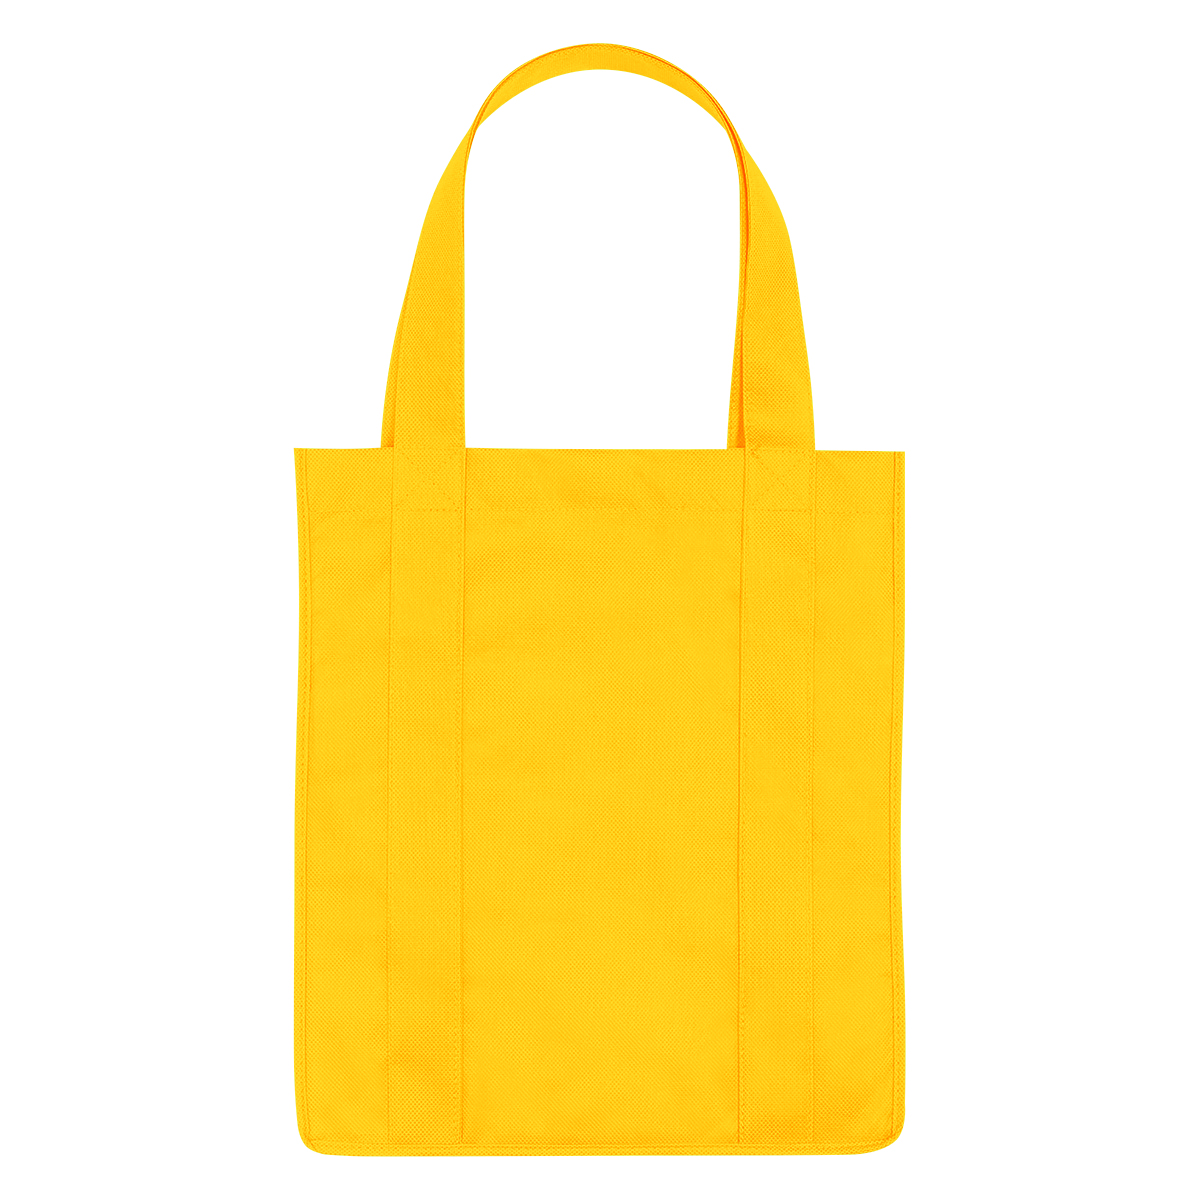 Reusable Foldable Non Woven Gift Shopping Bags with Handles Grocery Tote Bags Merchandise Bags 